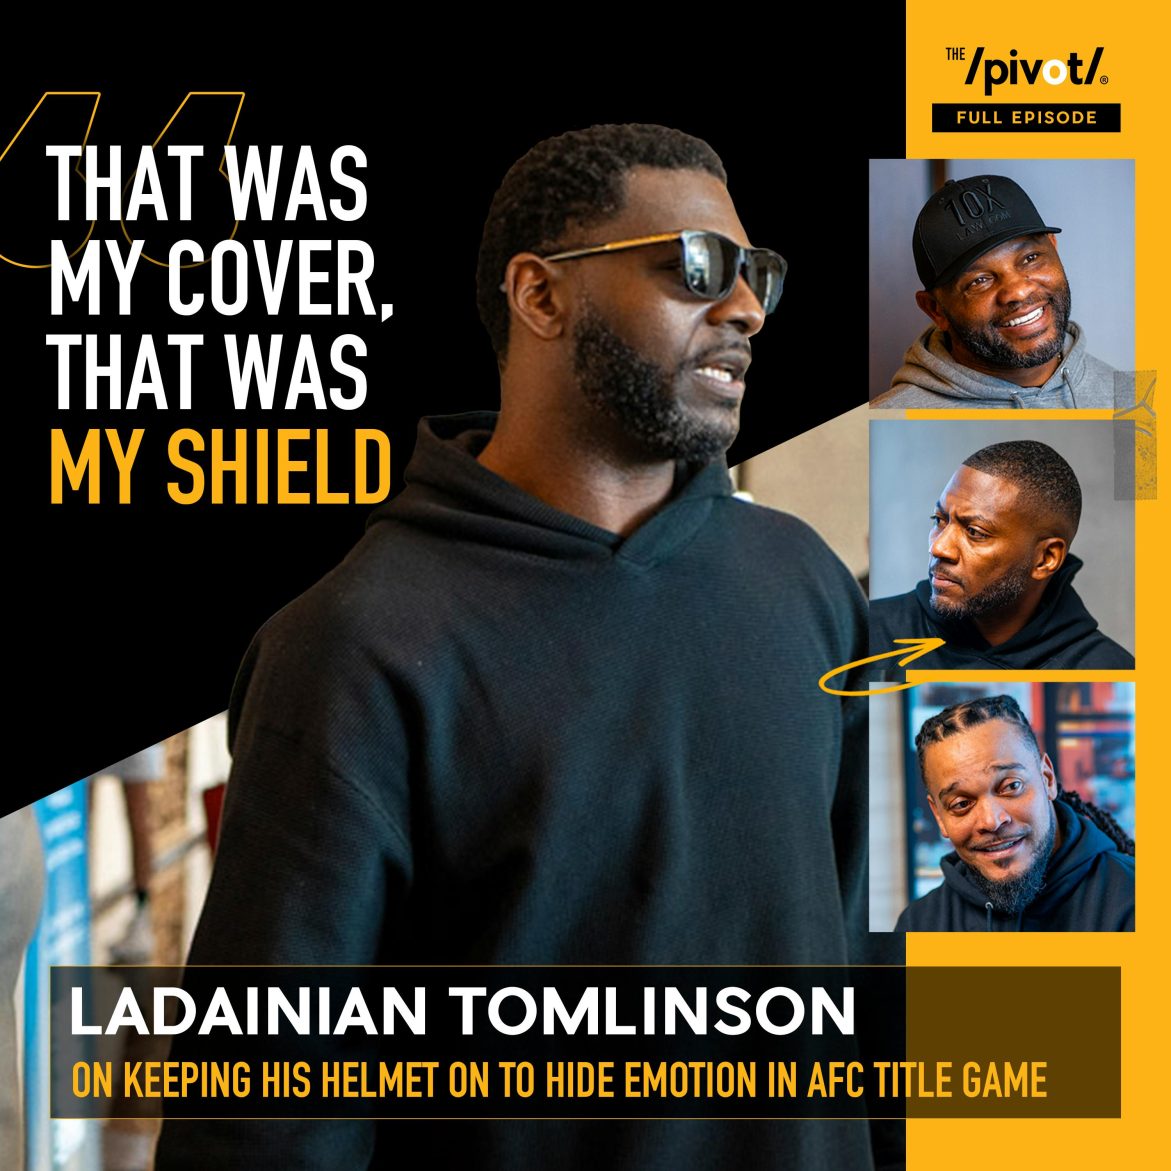 Black Podcasting - LaDainian Tomlinson Hall of Fame Running Back talks about his NFL Career, record breaking seasons, coming up short, growing up on slave plantation, relationship with his dad & his biggest disappointment